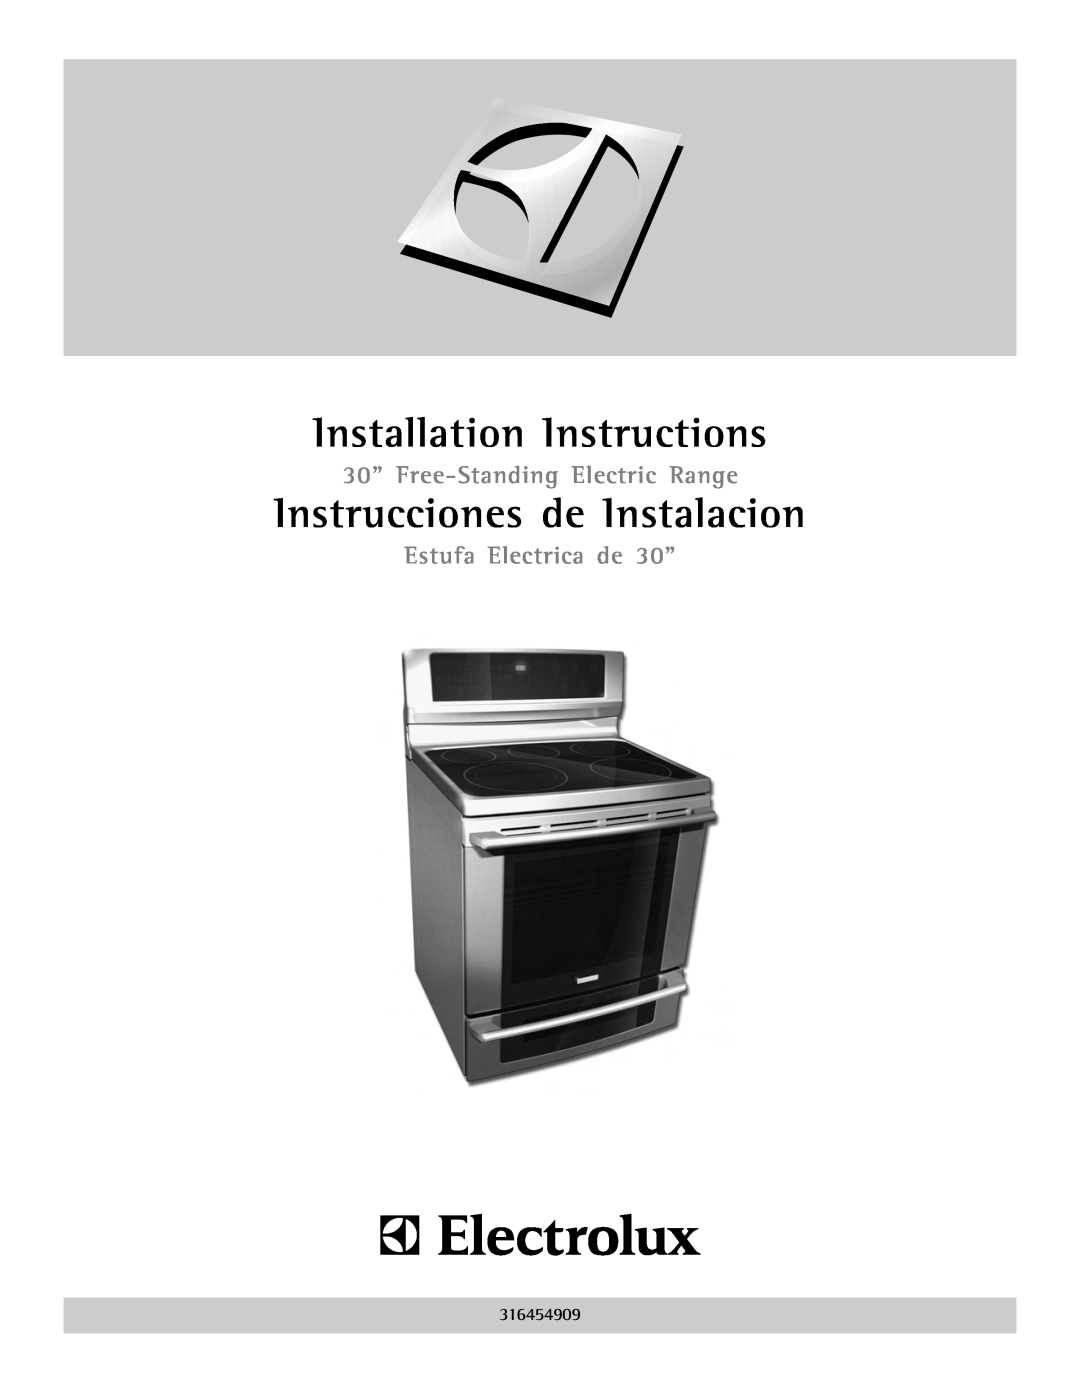 Electrolux 316454909 installation instructions Installation Instructions, Instrucciones de Instalacion 